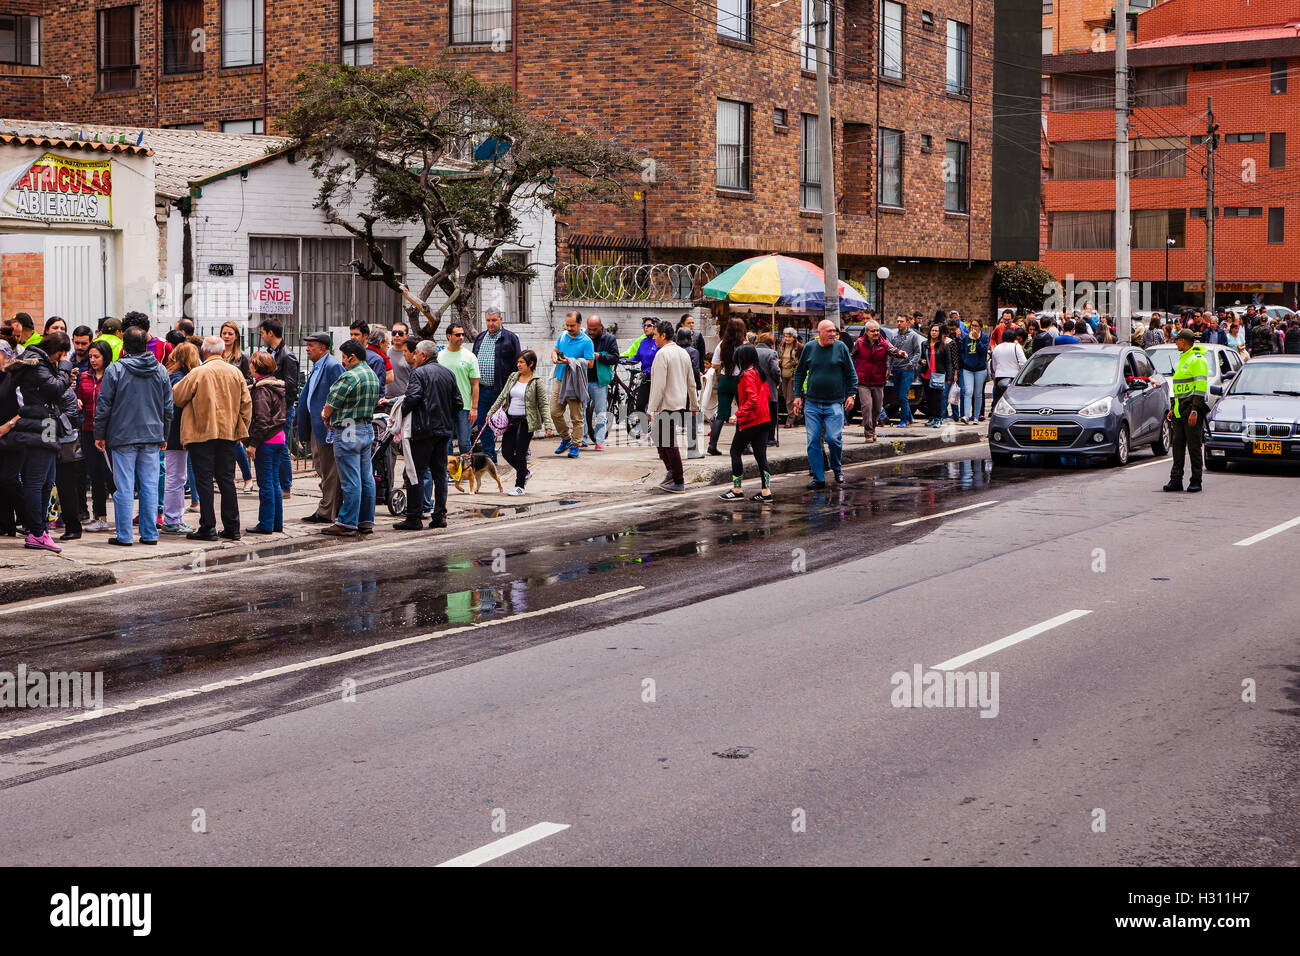 Bogota, Colombia - October 02, 2016: Voters queuing up to enter a polling station on Carrera 9, in the Andean capital city of Bogota, in the South American country of Colombia, to vote on the historic Peace Referendum. A policeman has stopped the traffic to enable voters to cross the road. Photo shot in the afternoon sunlight. Horizontal Format. Stock Photo